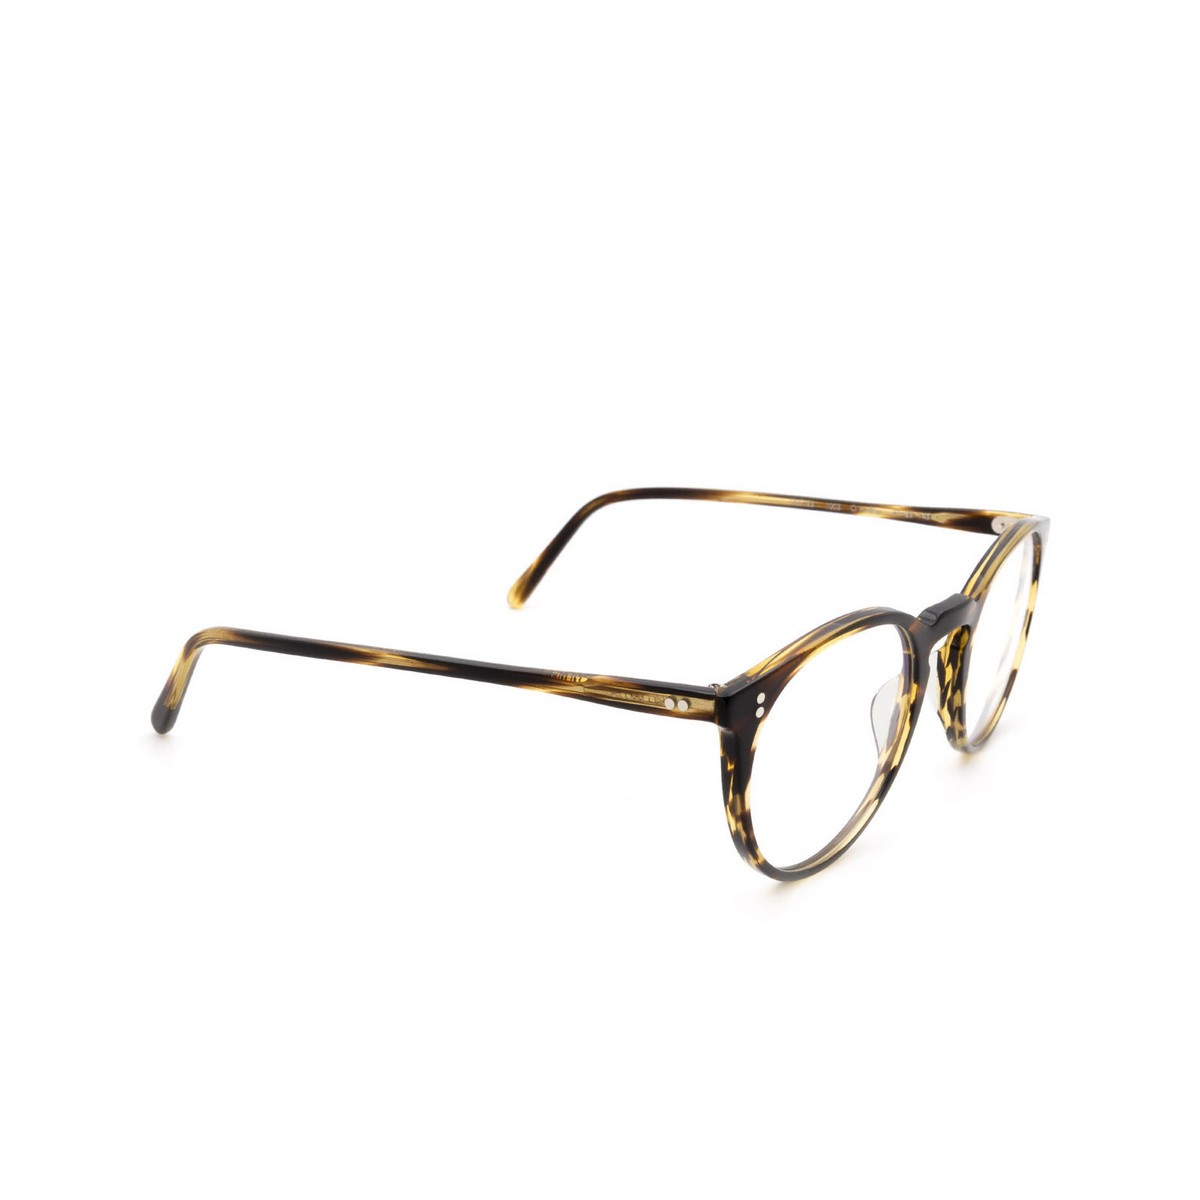 Oliver Peoples O'MALLEY Eyeglasses 1003 Cocobolo - three-quarters view